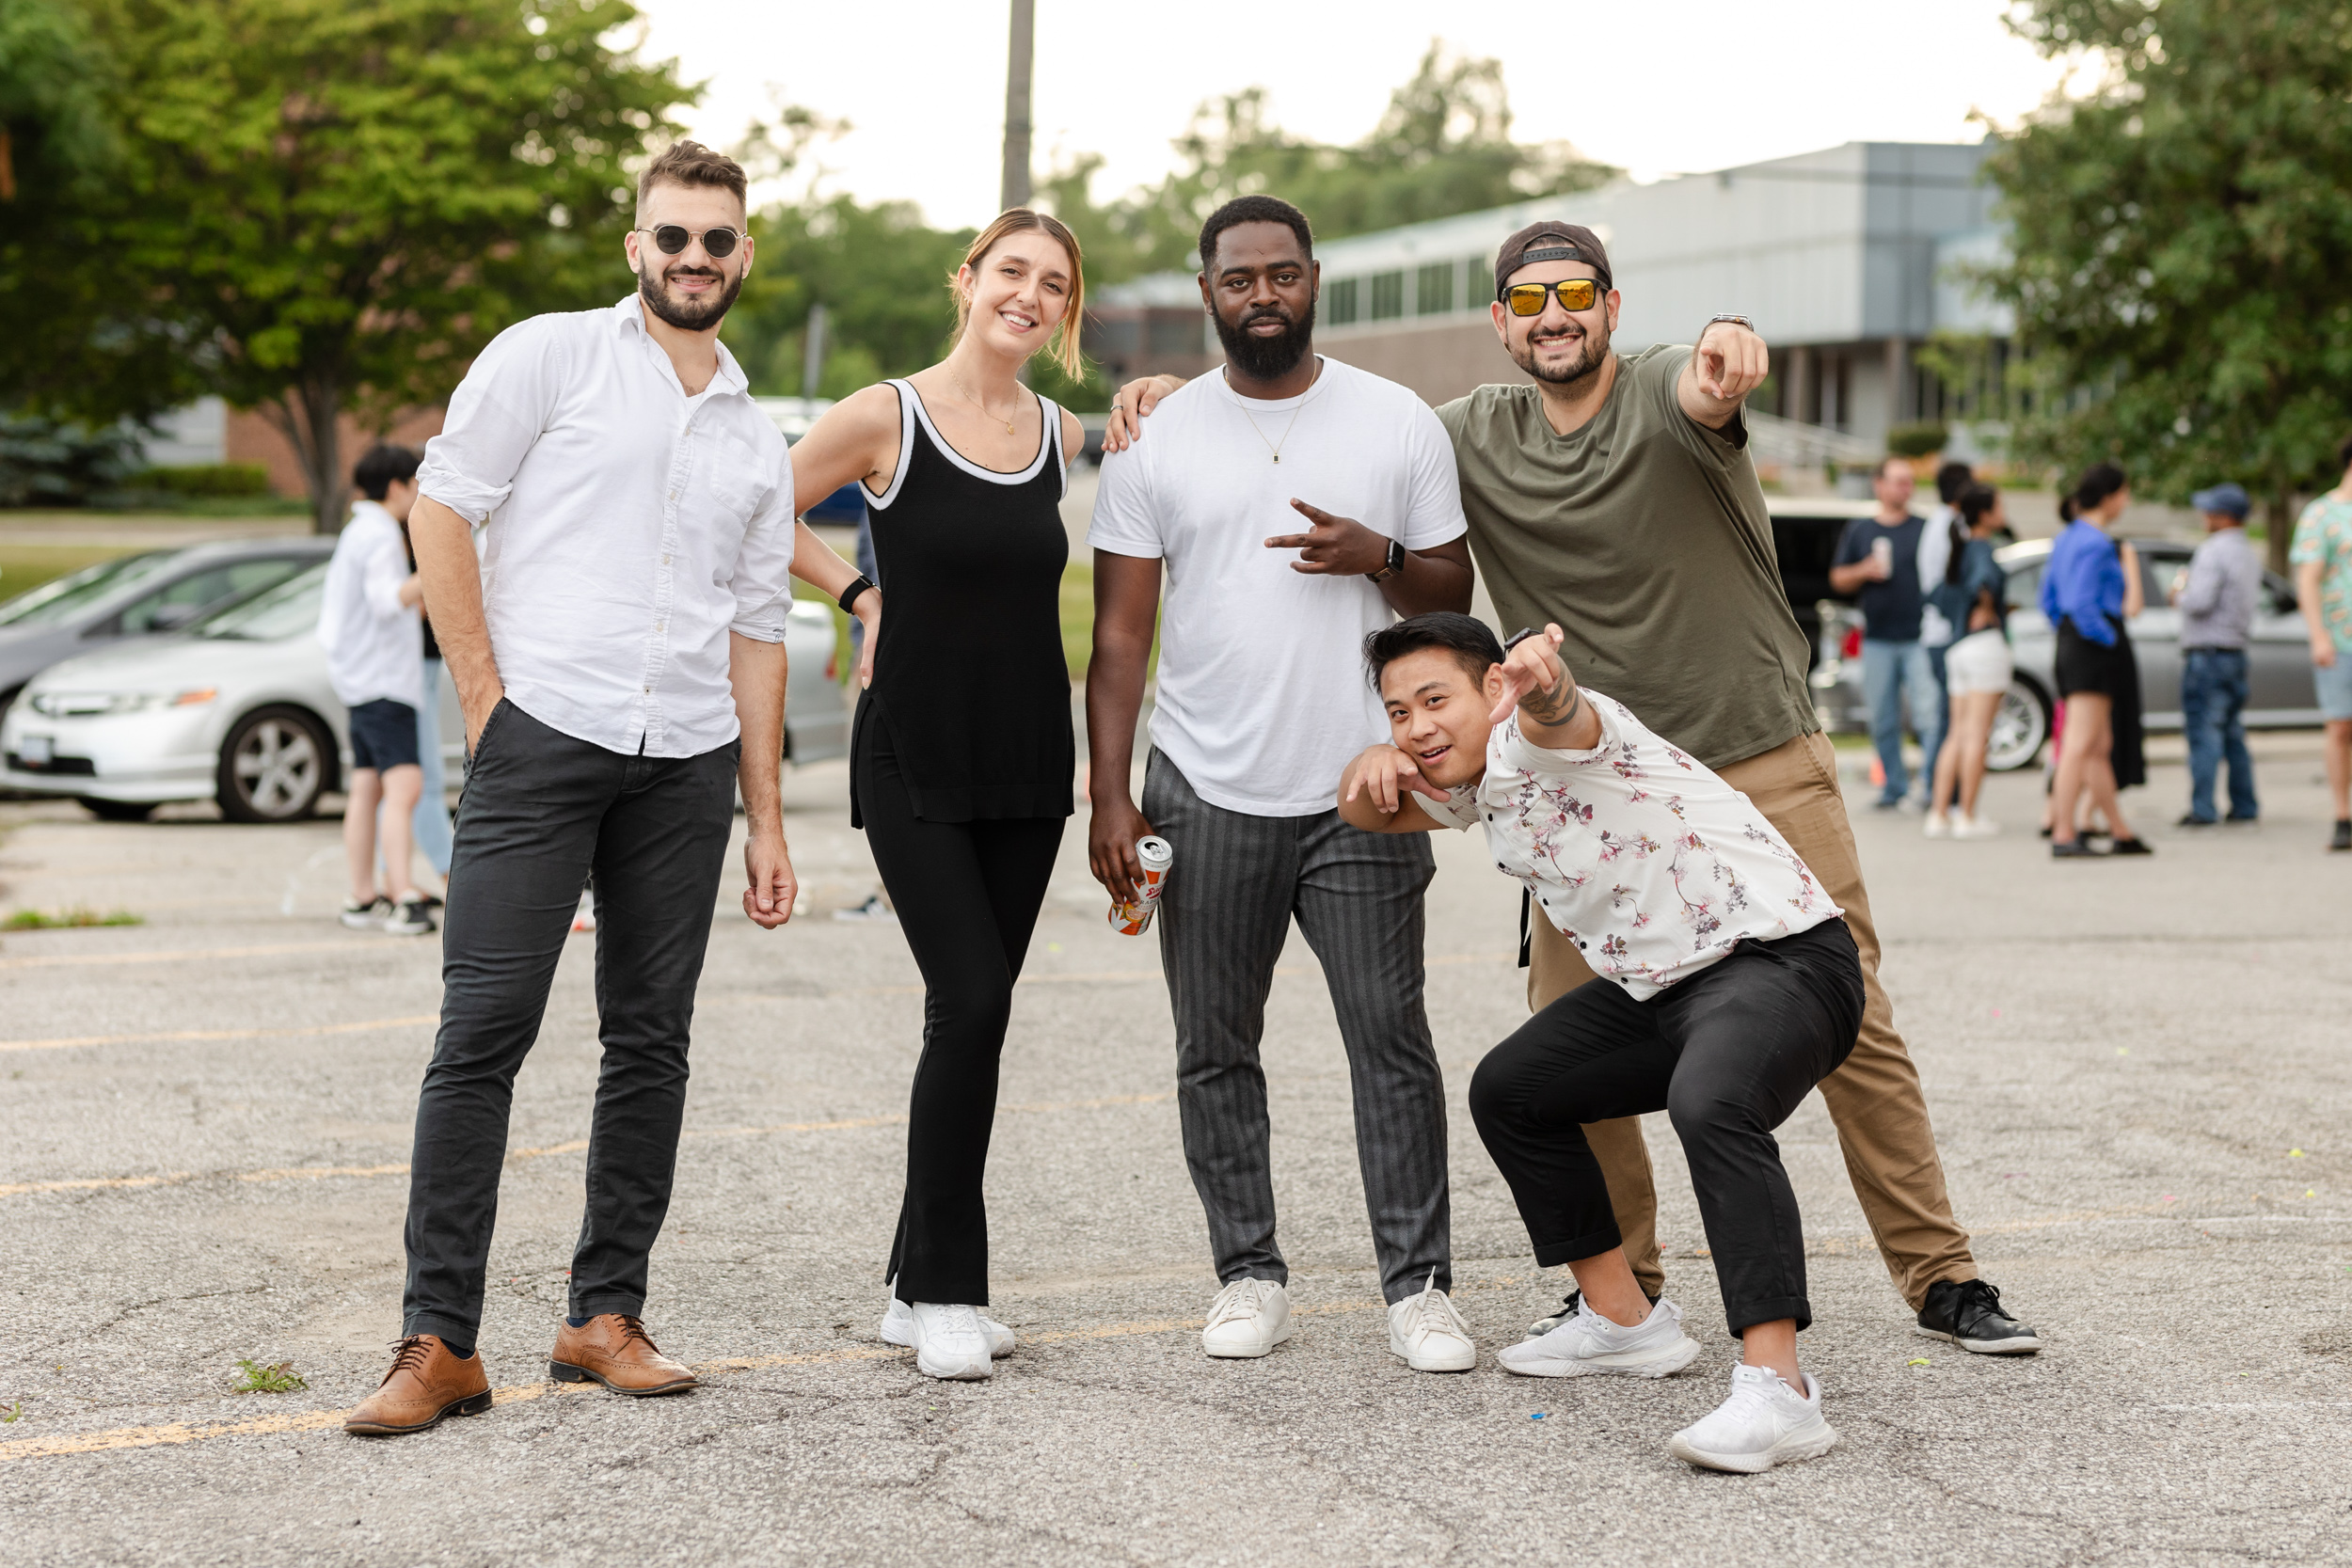 Social Event Photography: People posing for a group photo in a parking lot.